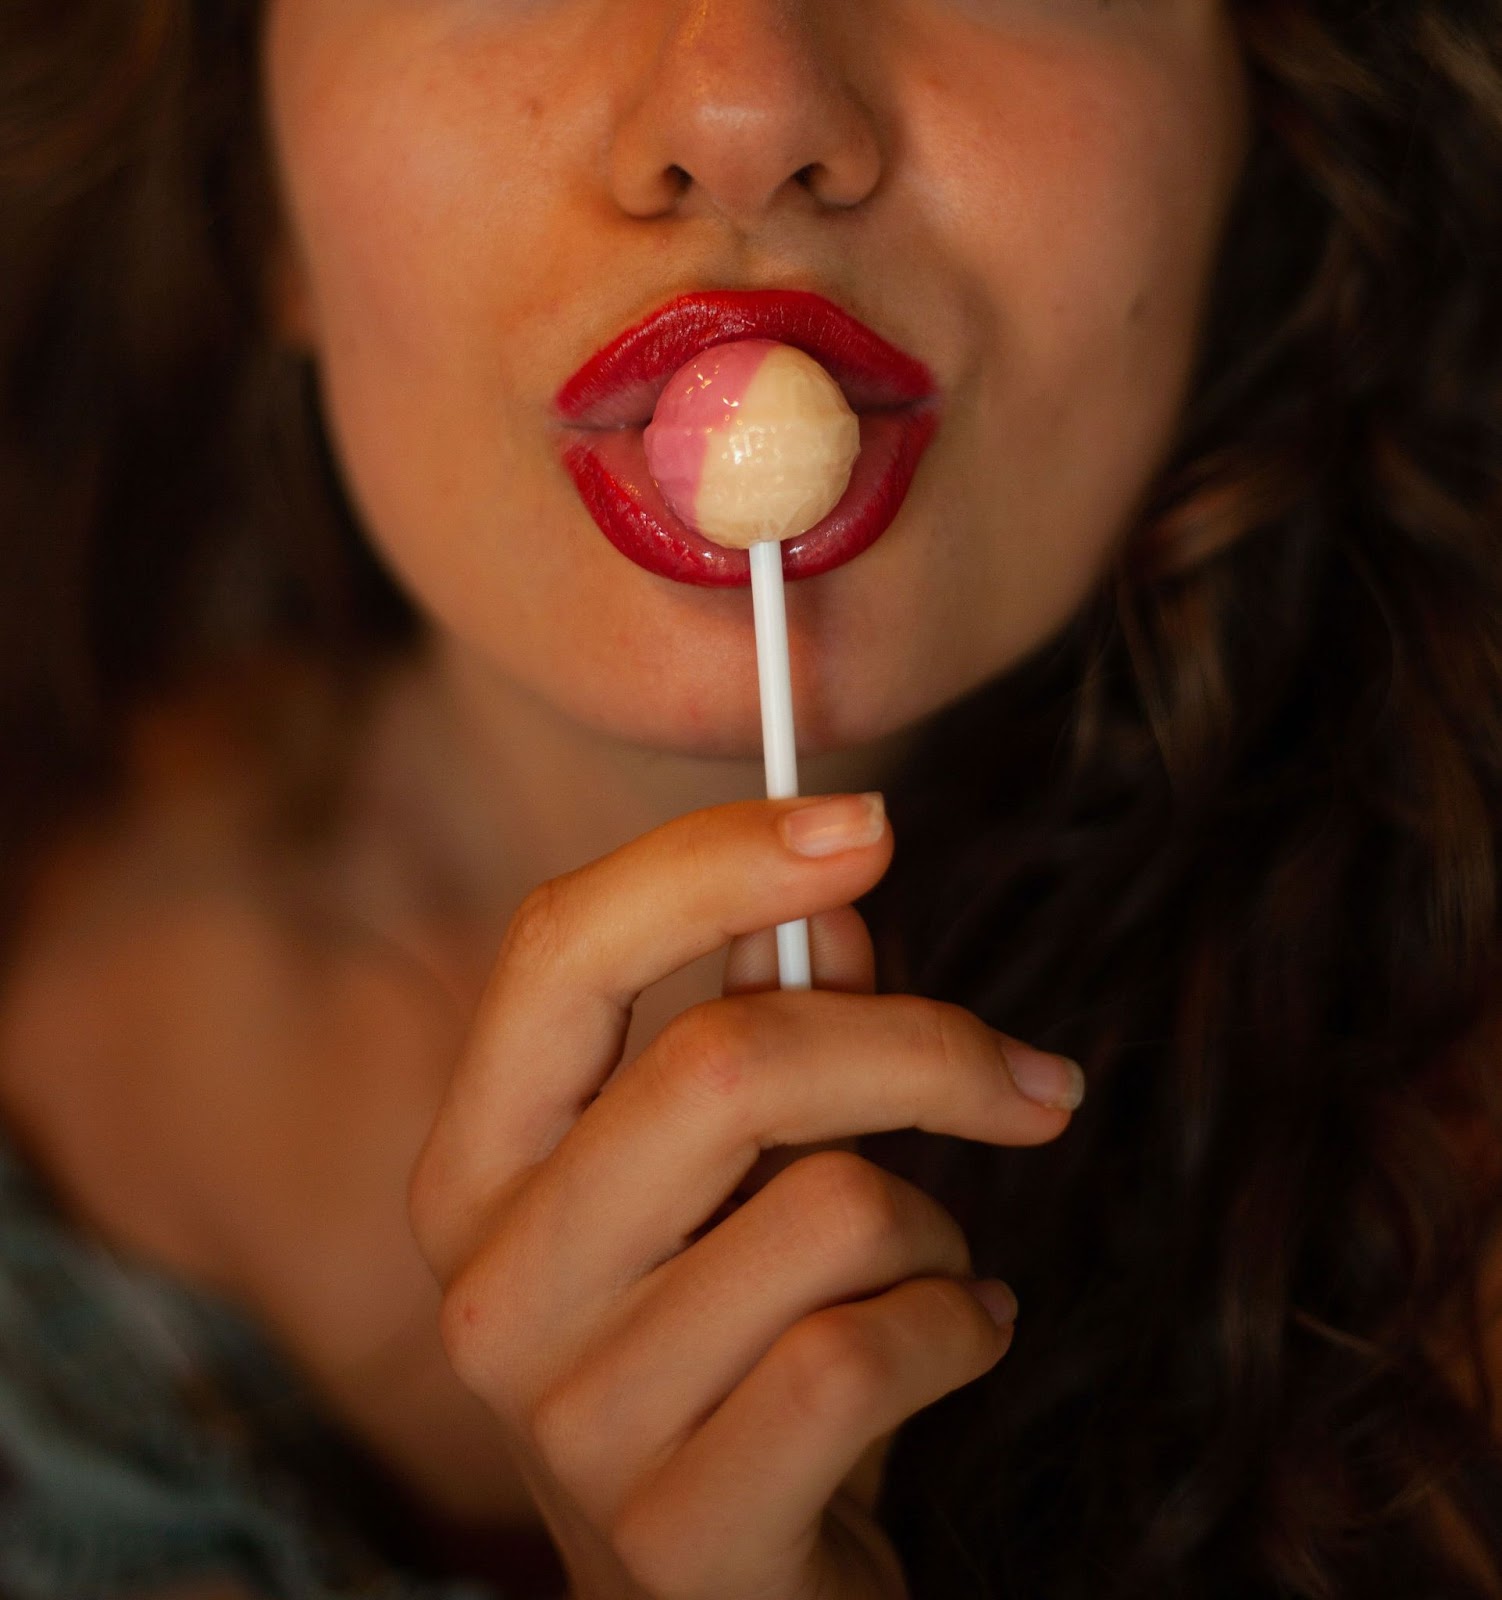 provocative image of a woman with a lollipop 